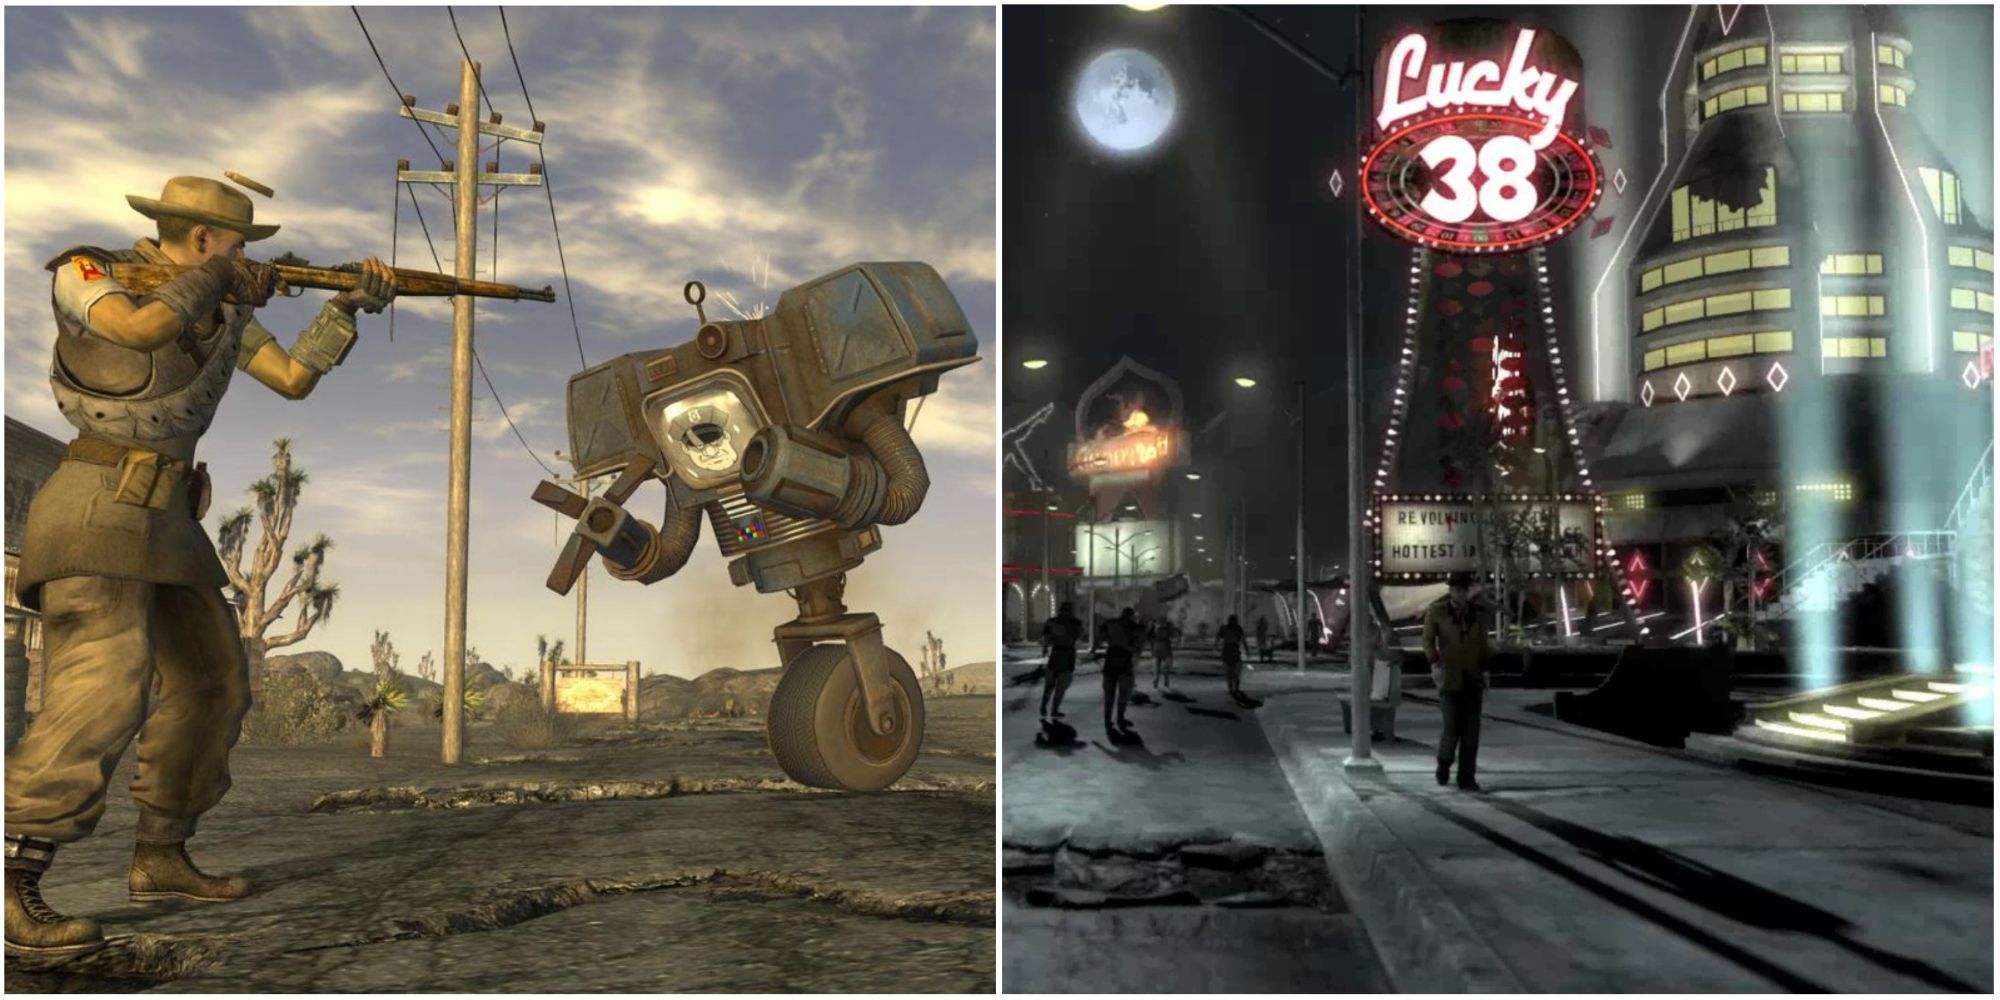 Fallout New Vegas - Fighting Atonotons in the wasteland and the New Vegas Strip